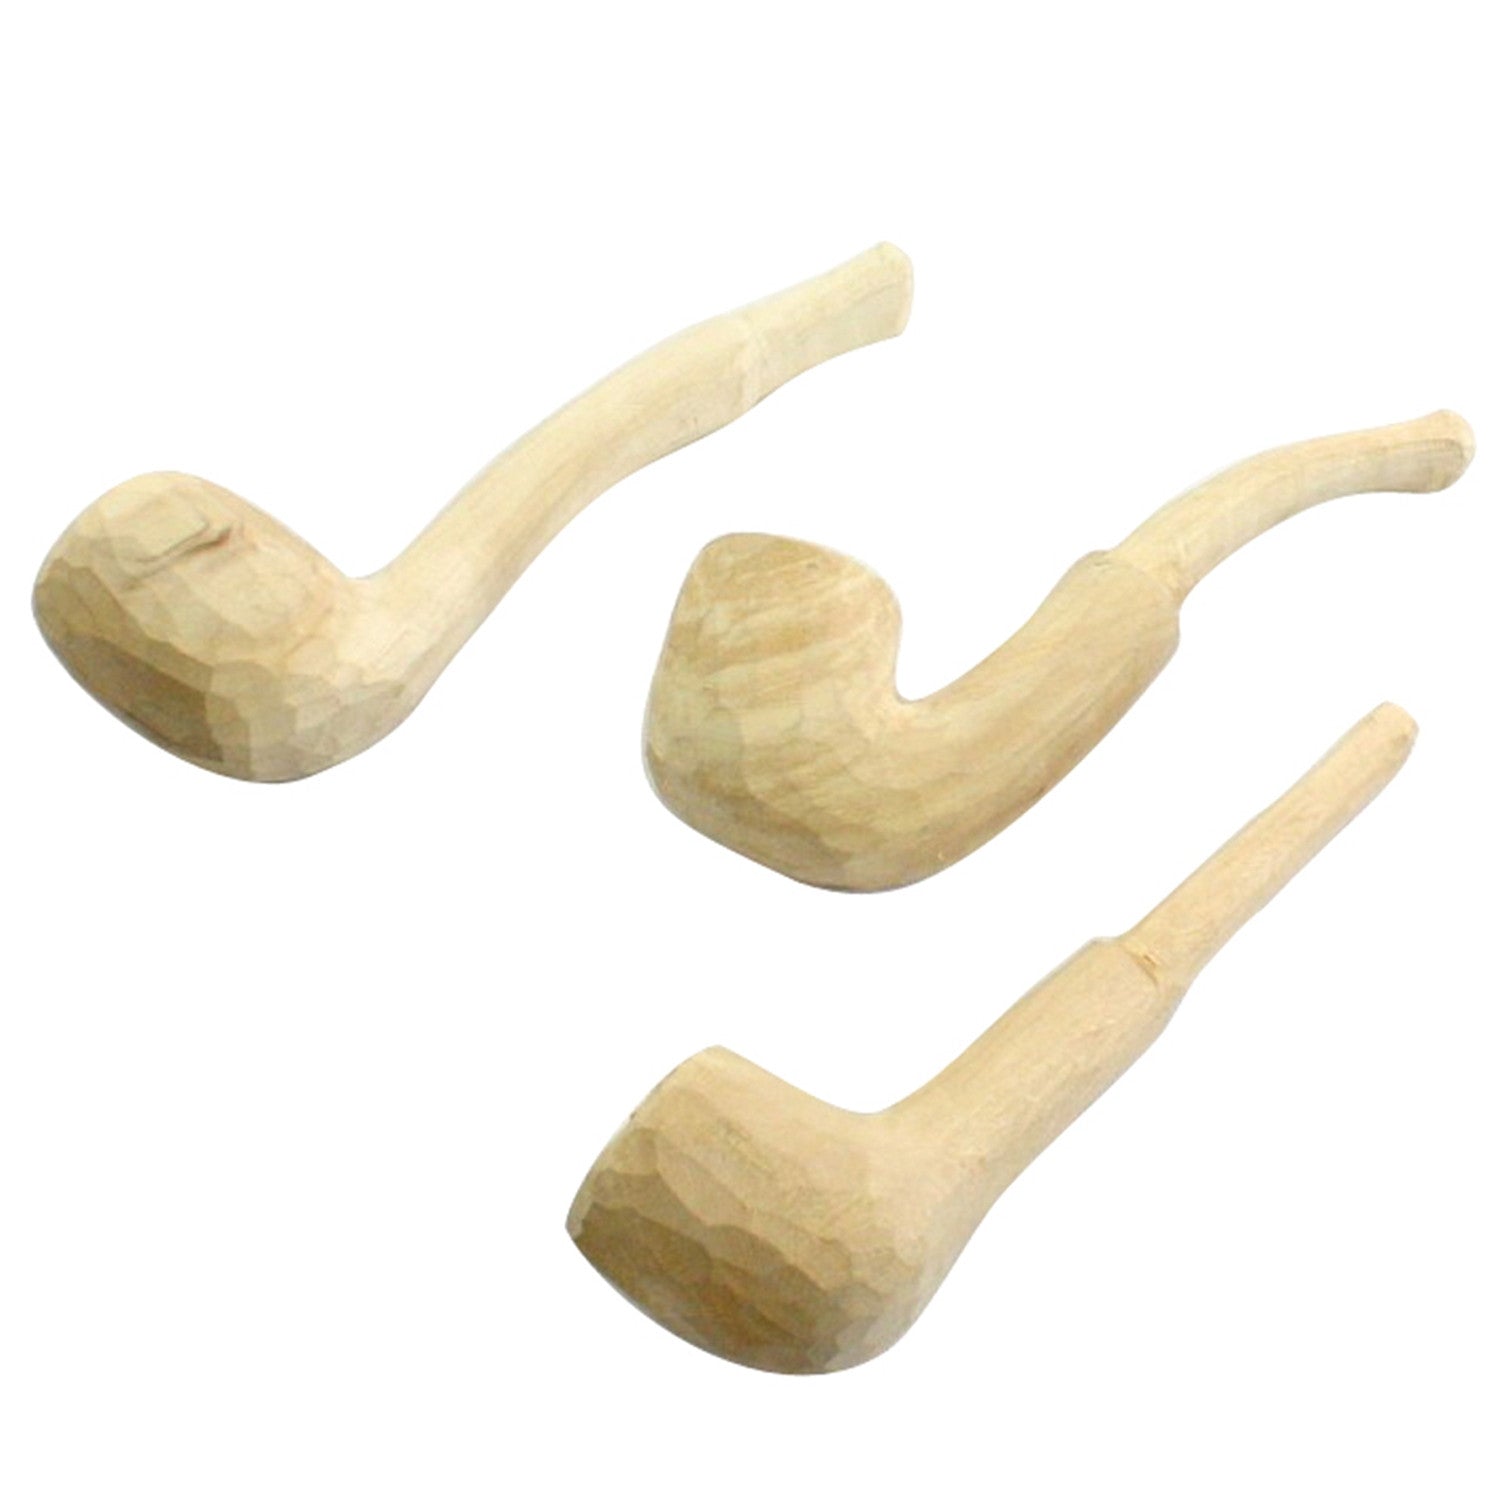 Carved Wood Pipes (Set of 3)